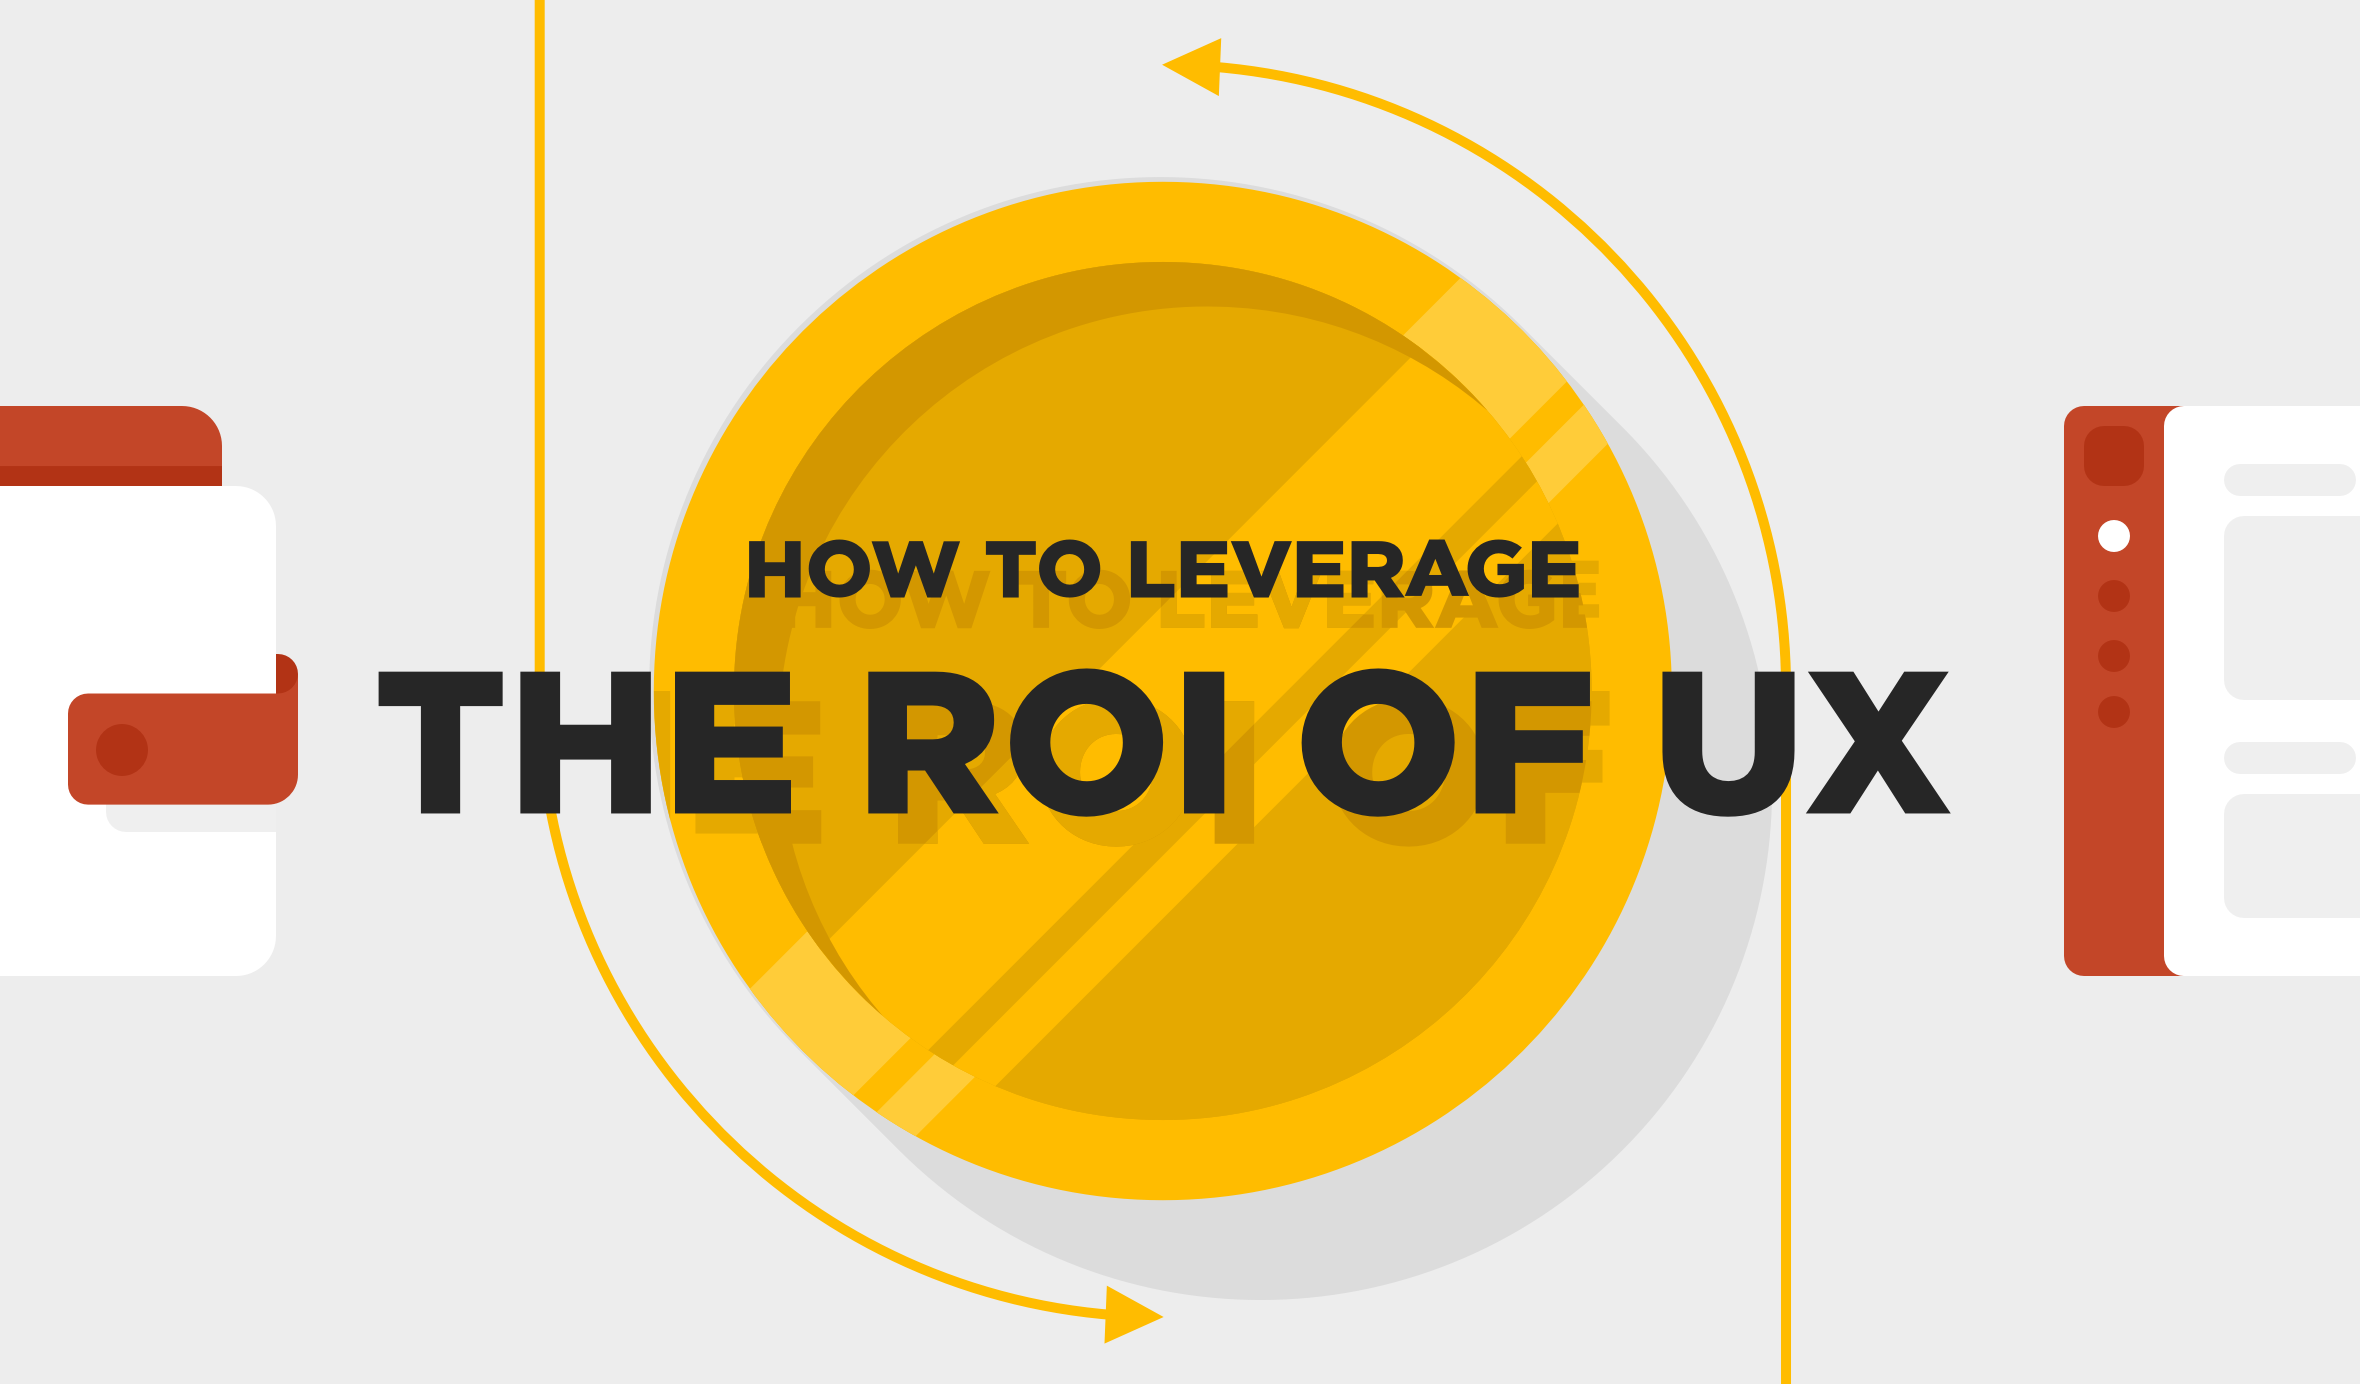 Cover Image for How to Leverage the ROI of UX in Uncertain Times